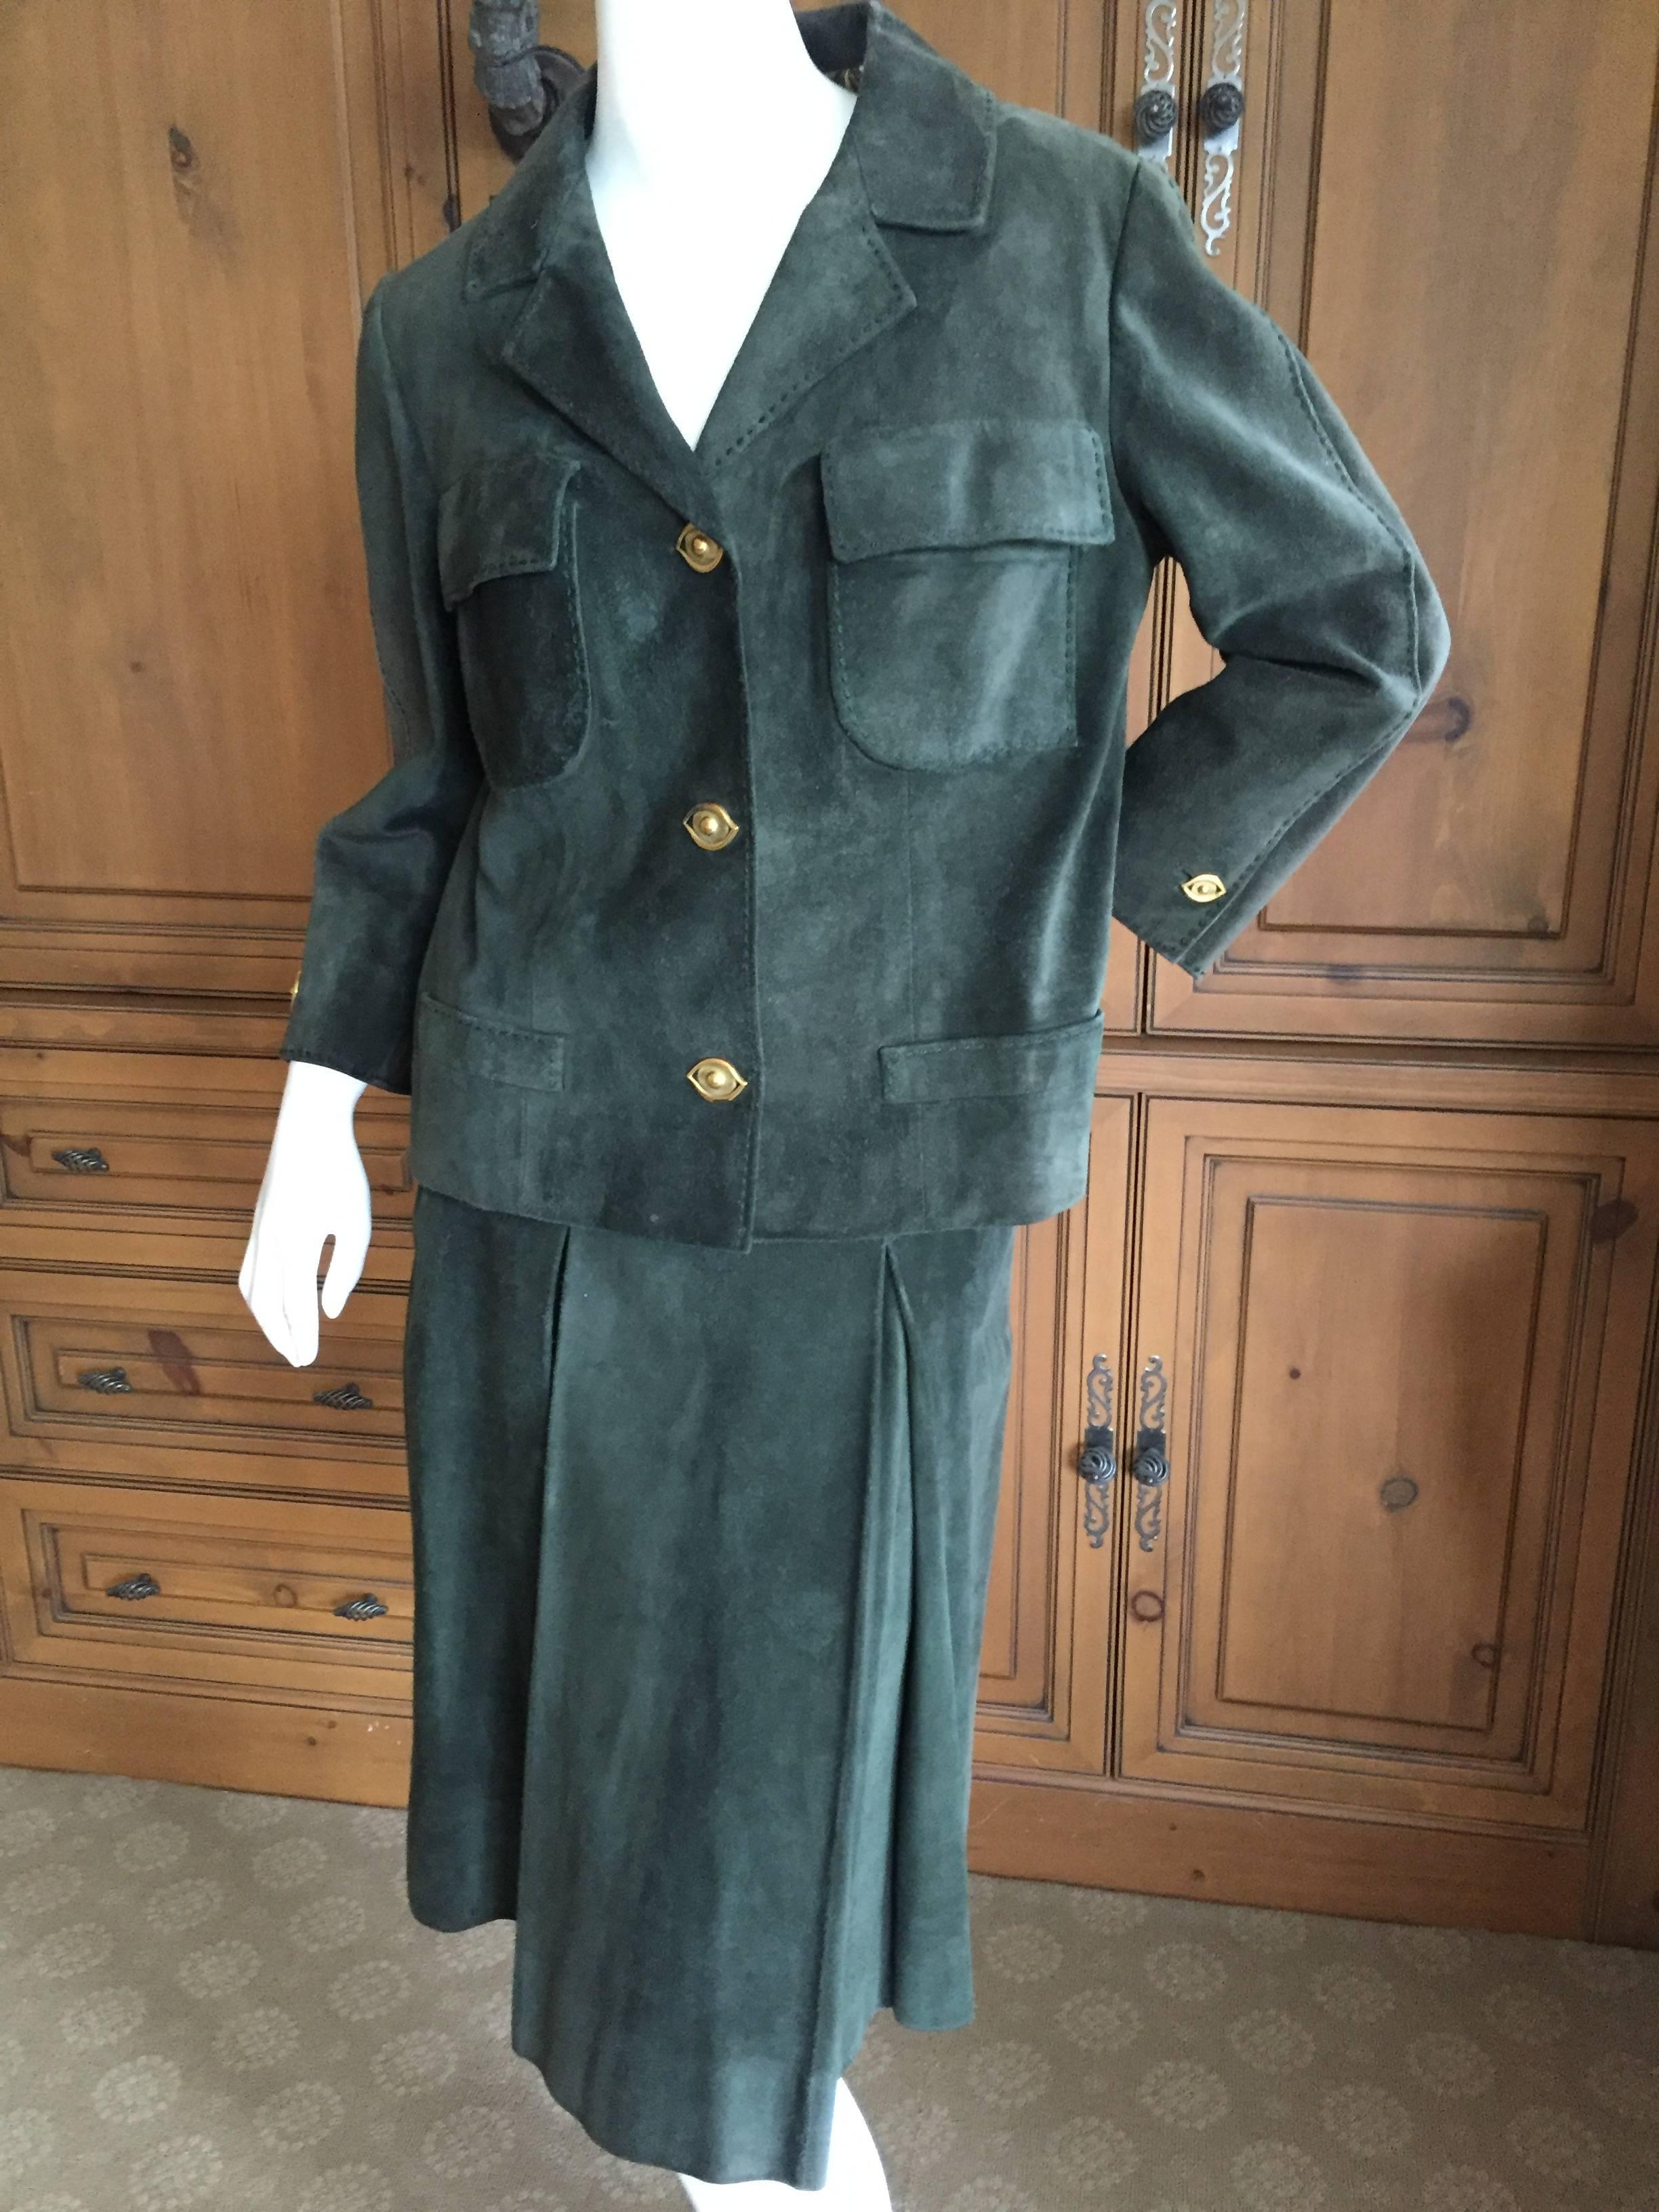 Gorgeous green suede skirt suit from Hermes circa 1966.
Beautifully accented with top stitching.
This is a really special vintage suit. Unusual 